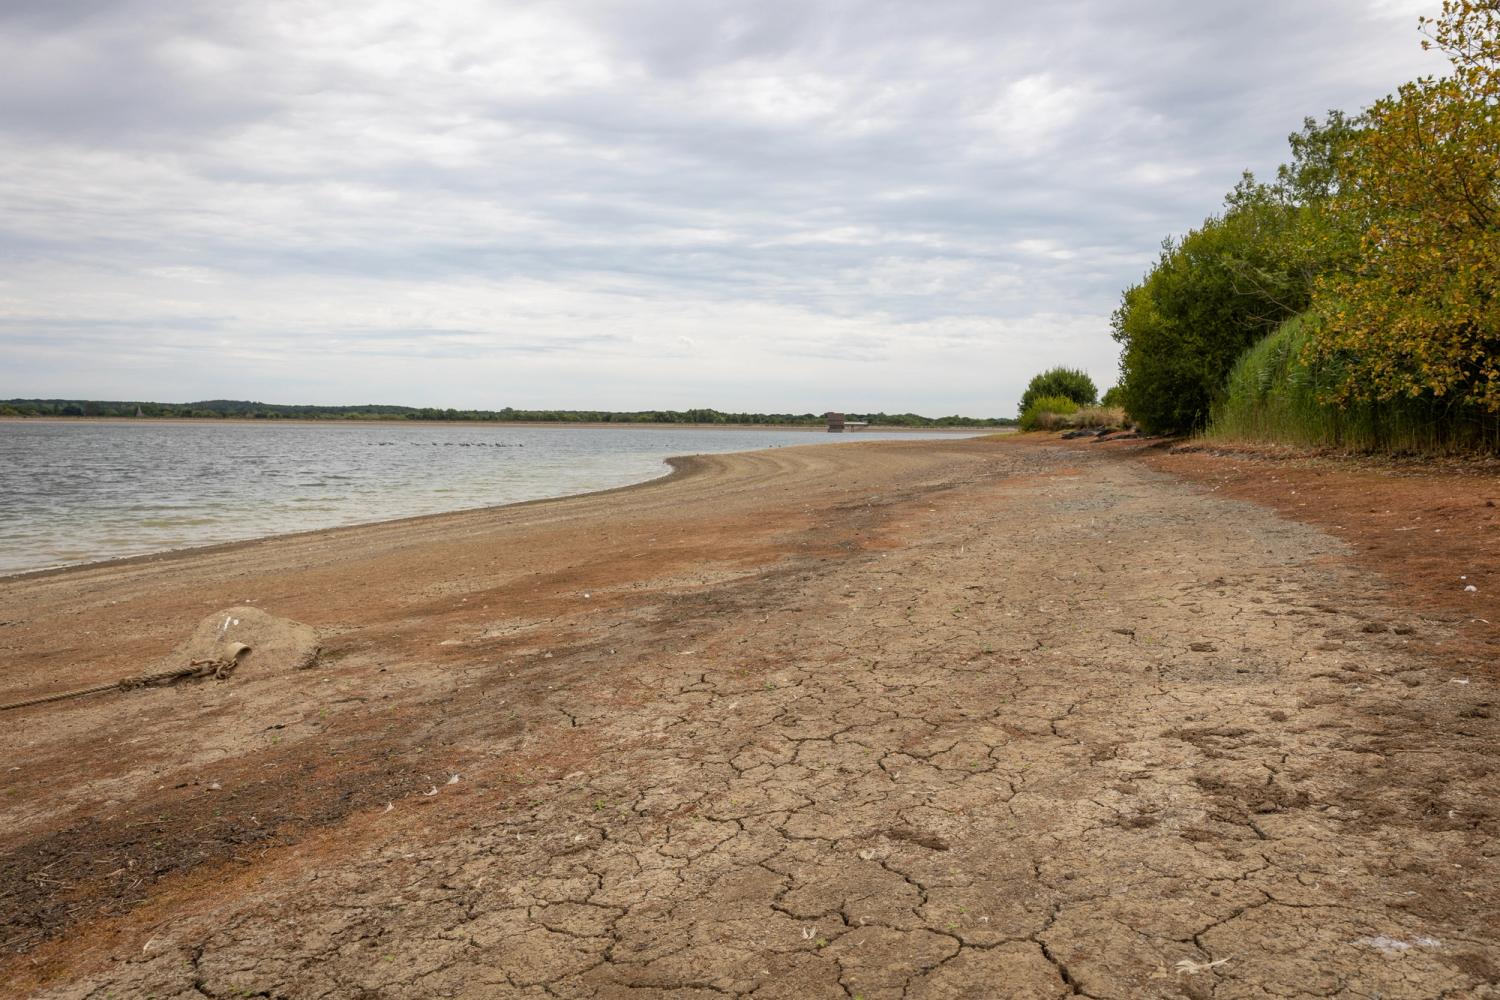 Photograph of dry, cracked ground at Arlington Reservoir, due to prolonged hot weather and little rainfall.